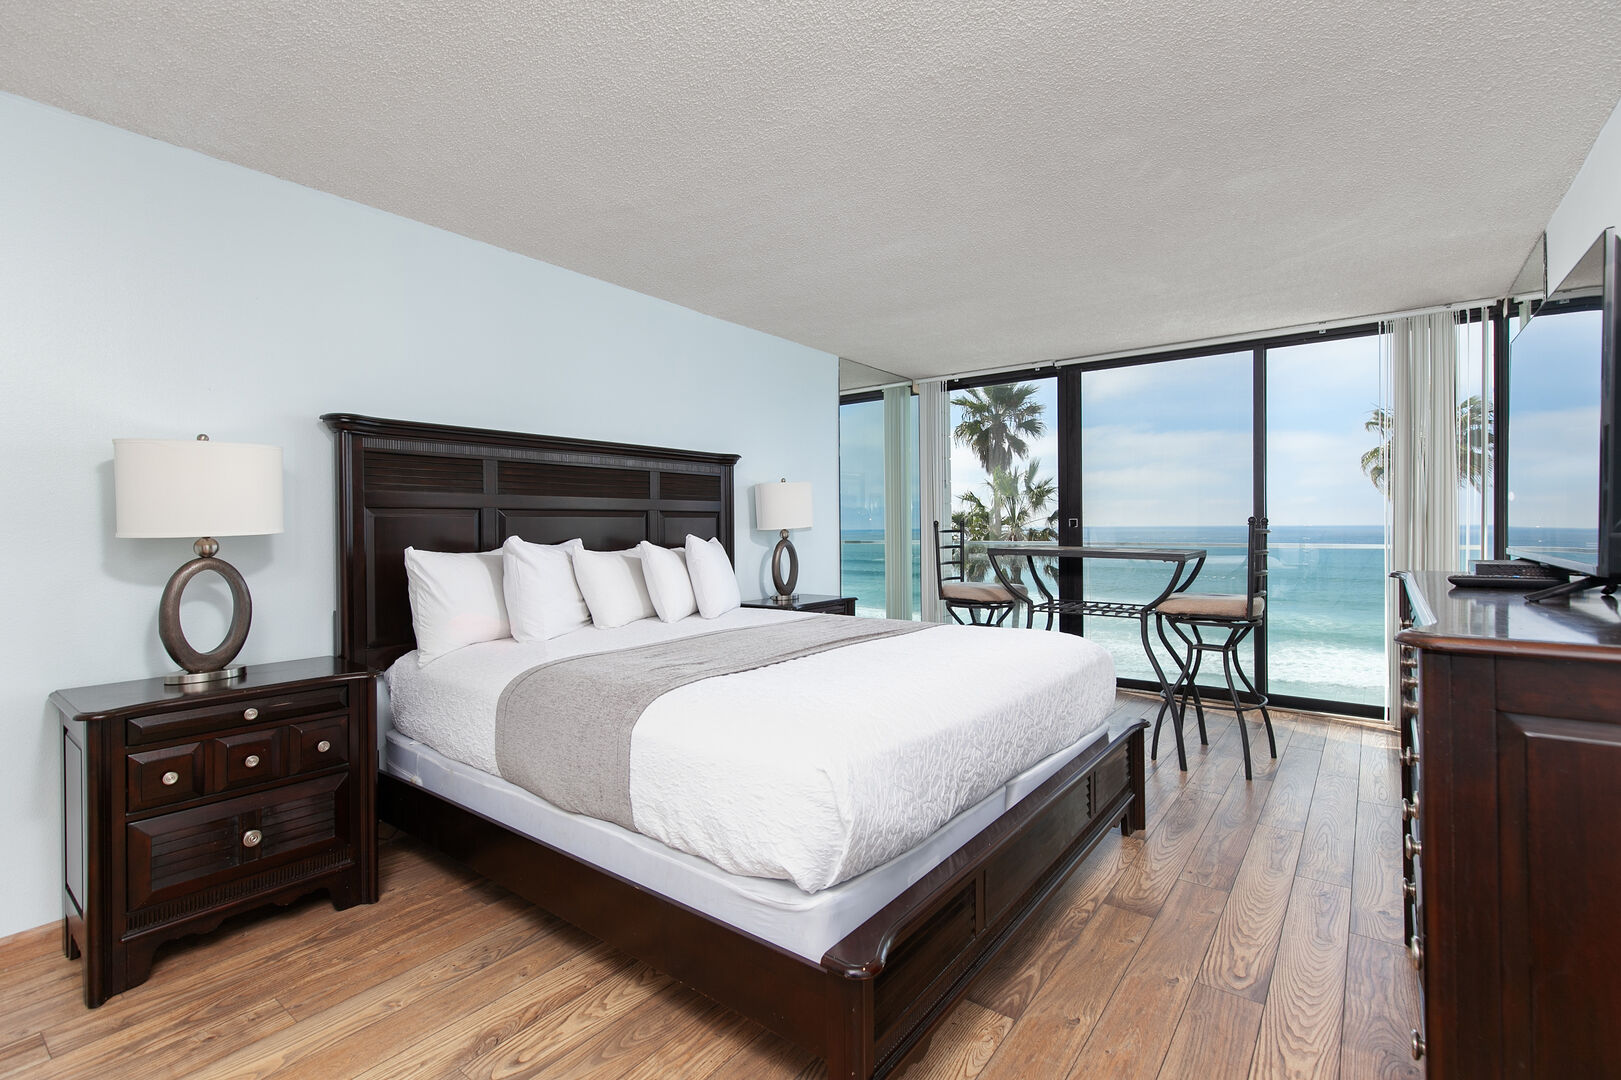 Primary Bedroom with ocean view and king bed